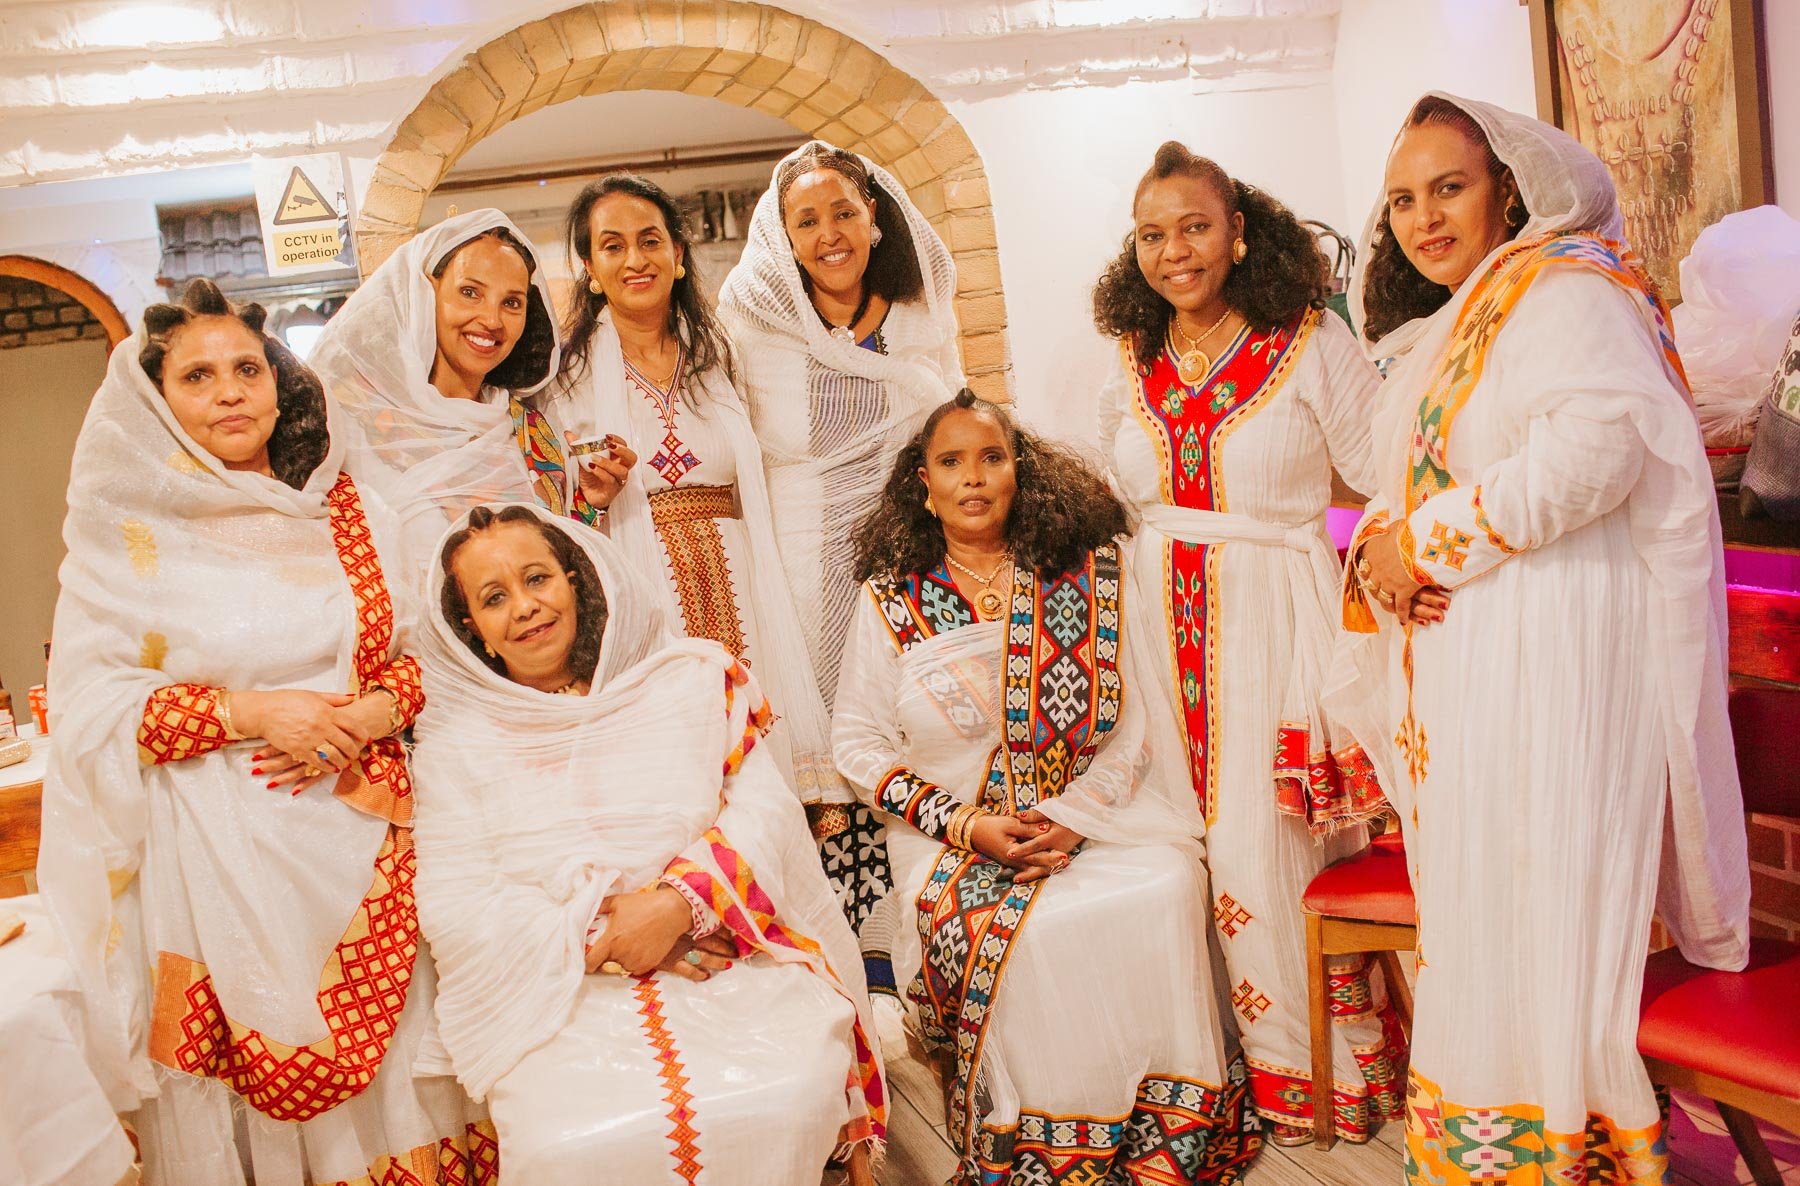 Guests of the Christening dressed in traditional Eritrean dress.